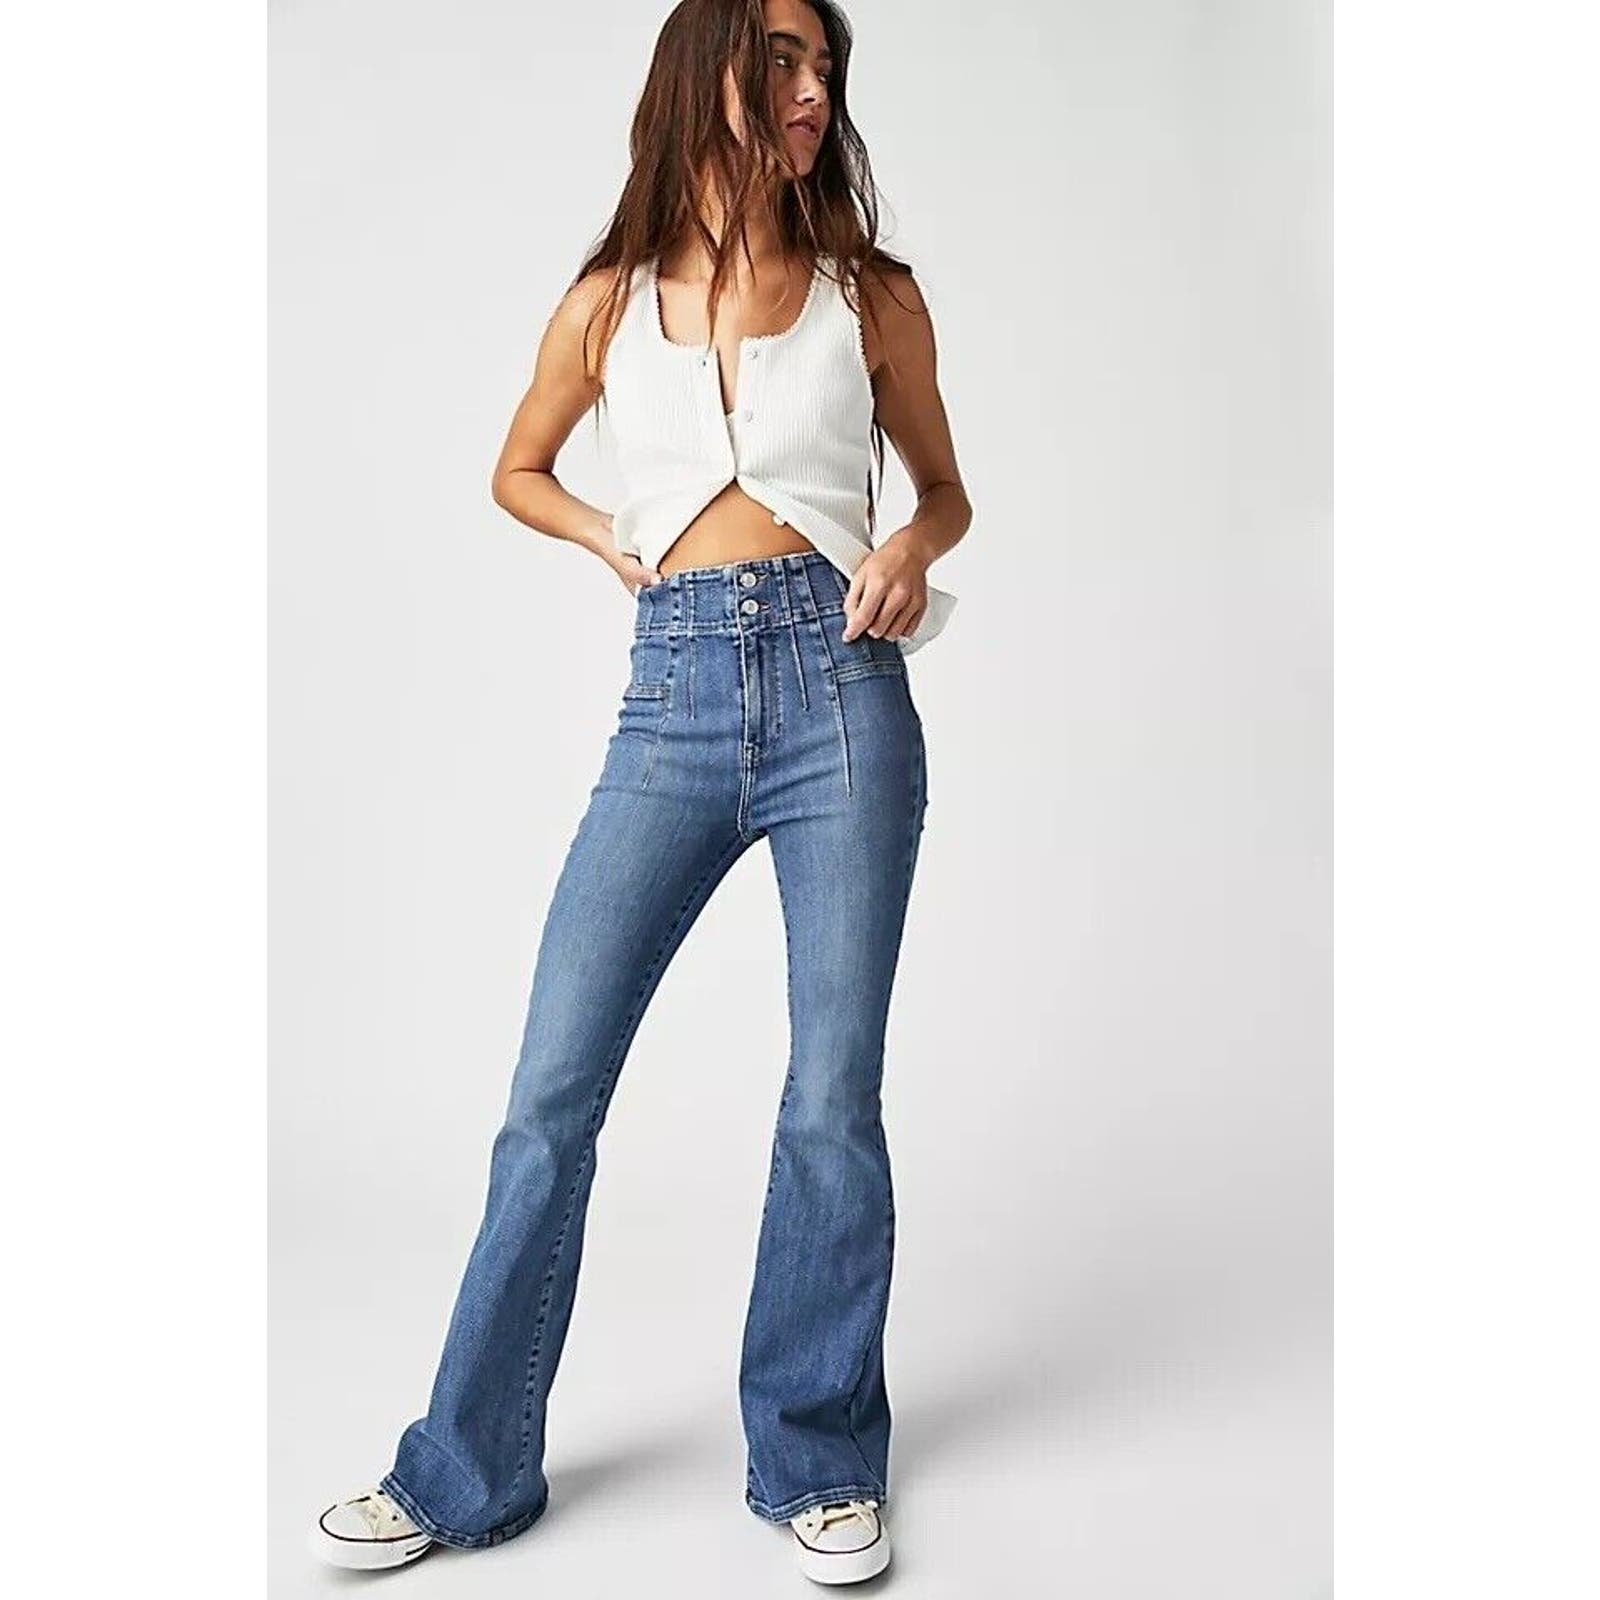 Authentic Free People We the Free Jayde Flare Jeans High Rise Boho Festival NWT Womens 30 pa1AuVL1I for sale